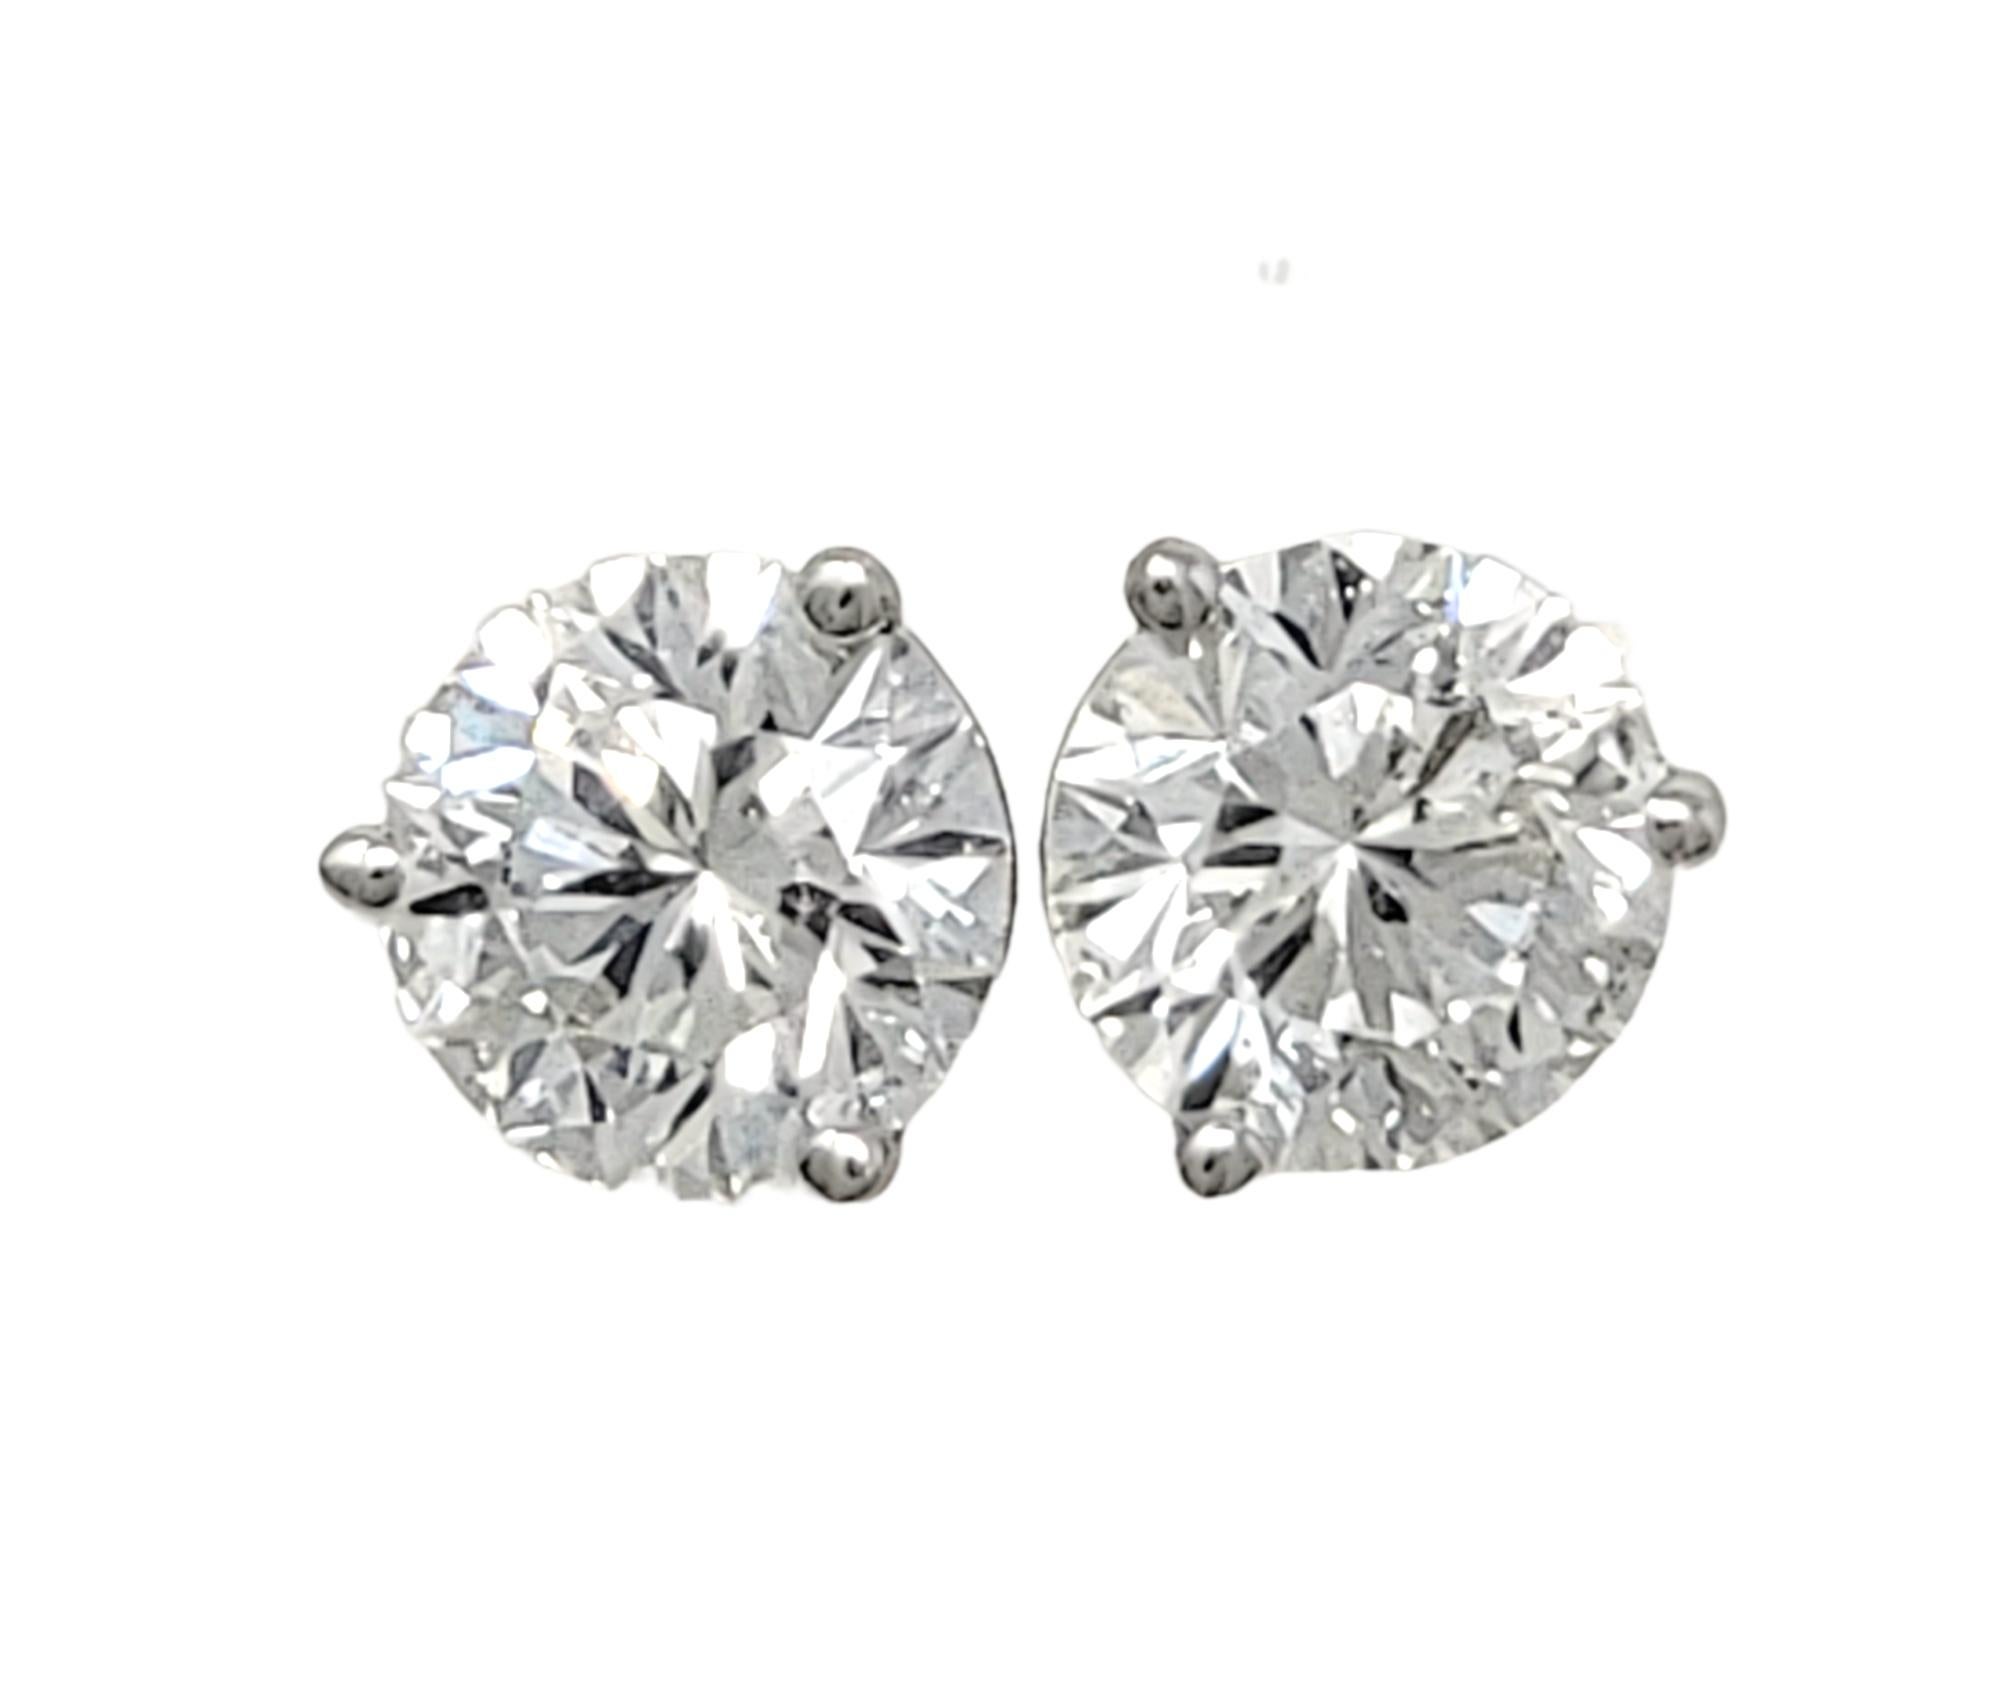 .94 Carats Total Round Leo Diamond Stud Earrings in White Gold 3 Prong Setting In Good Condition For Sale In Scottsdale, AZ